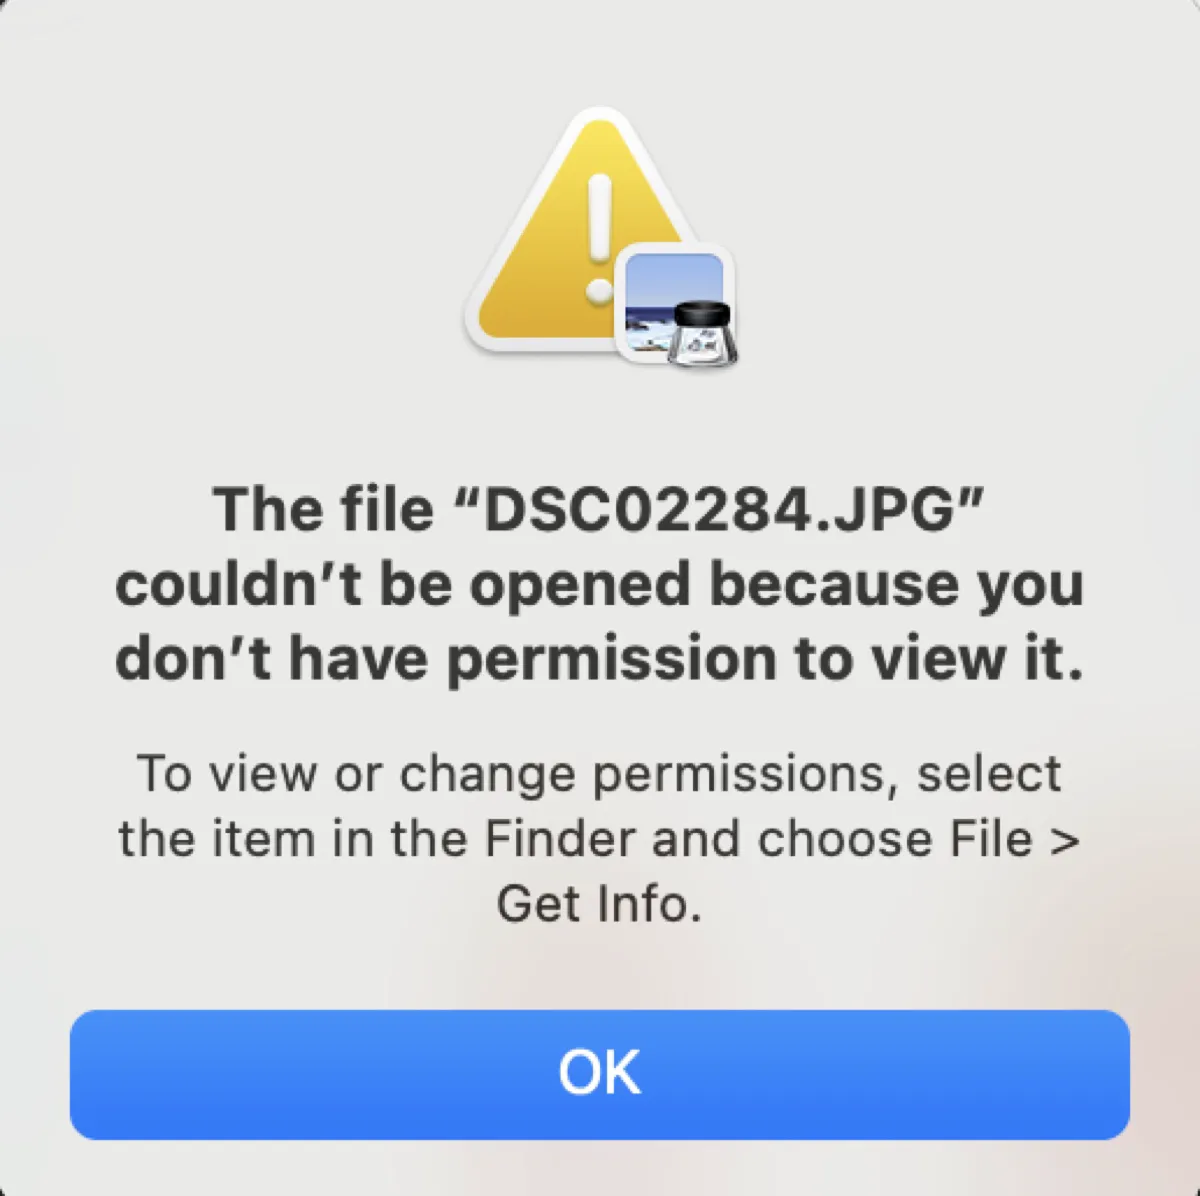 The file couldnt be opened because you dont have permission to view it